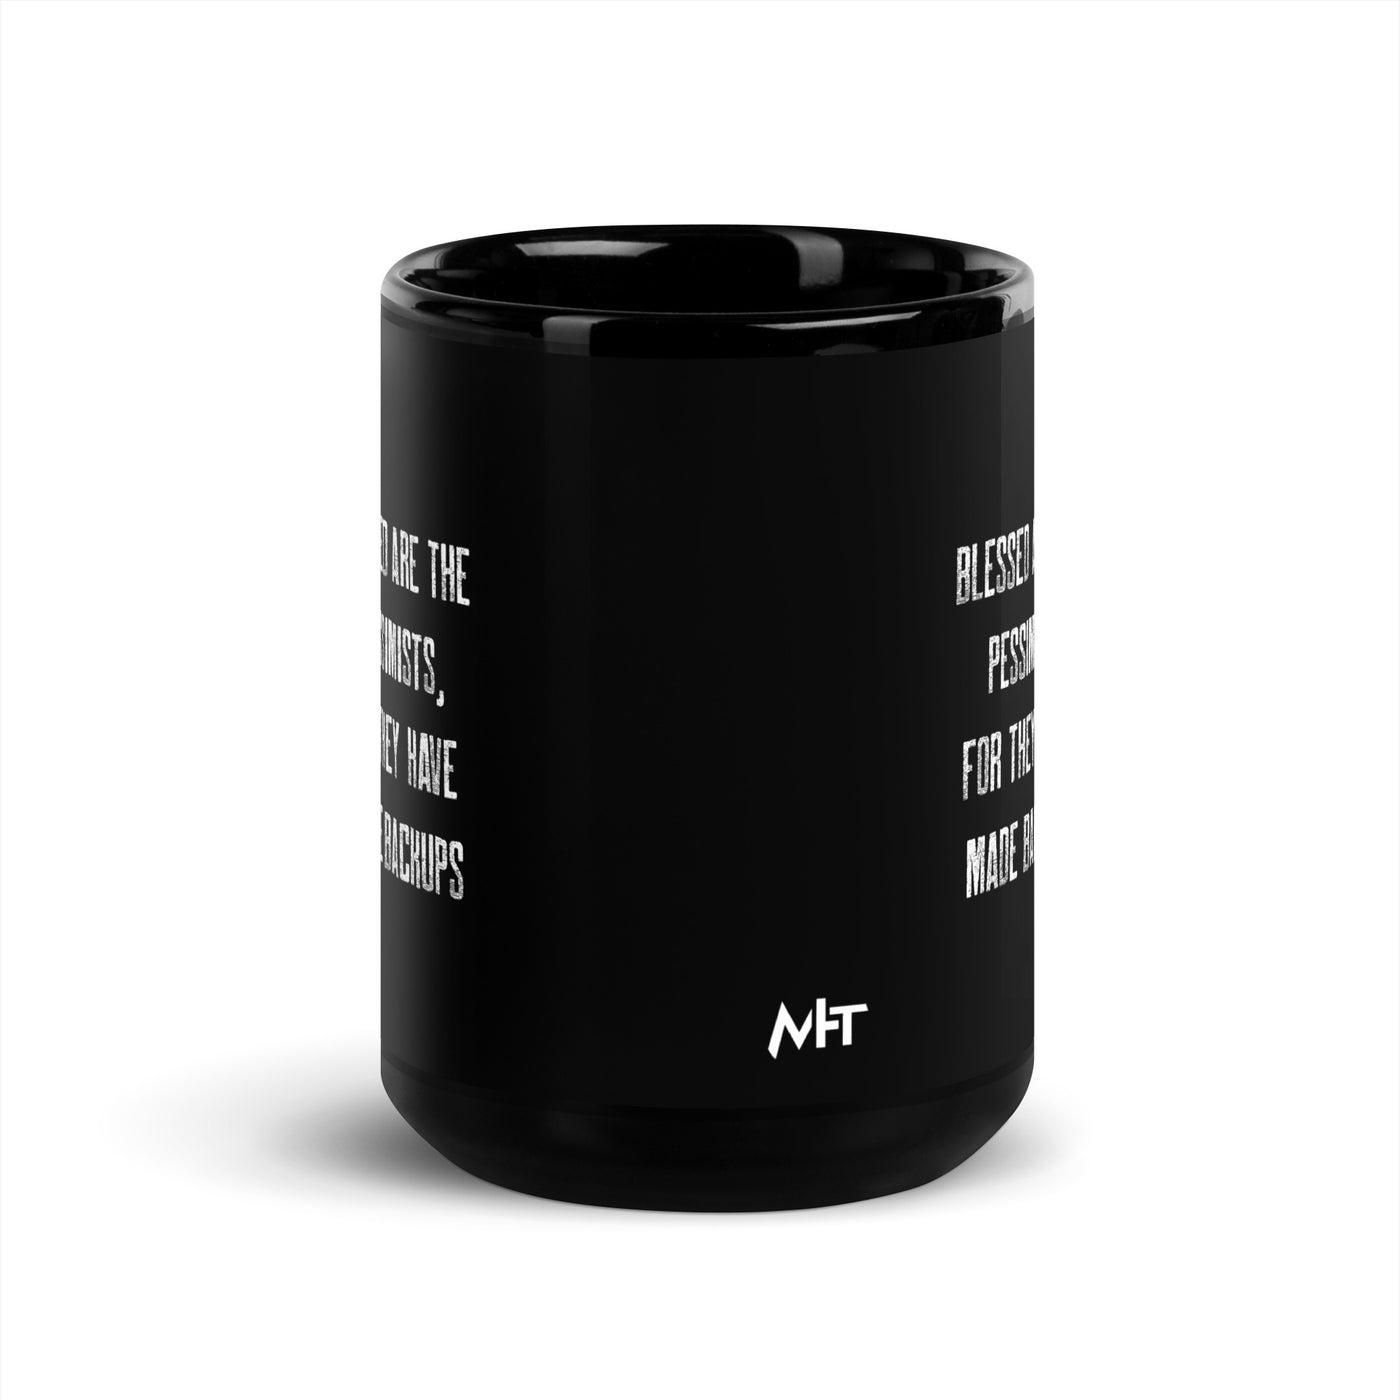 Blessed are the pessimists for they have made backups - Black Glossy Mug